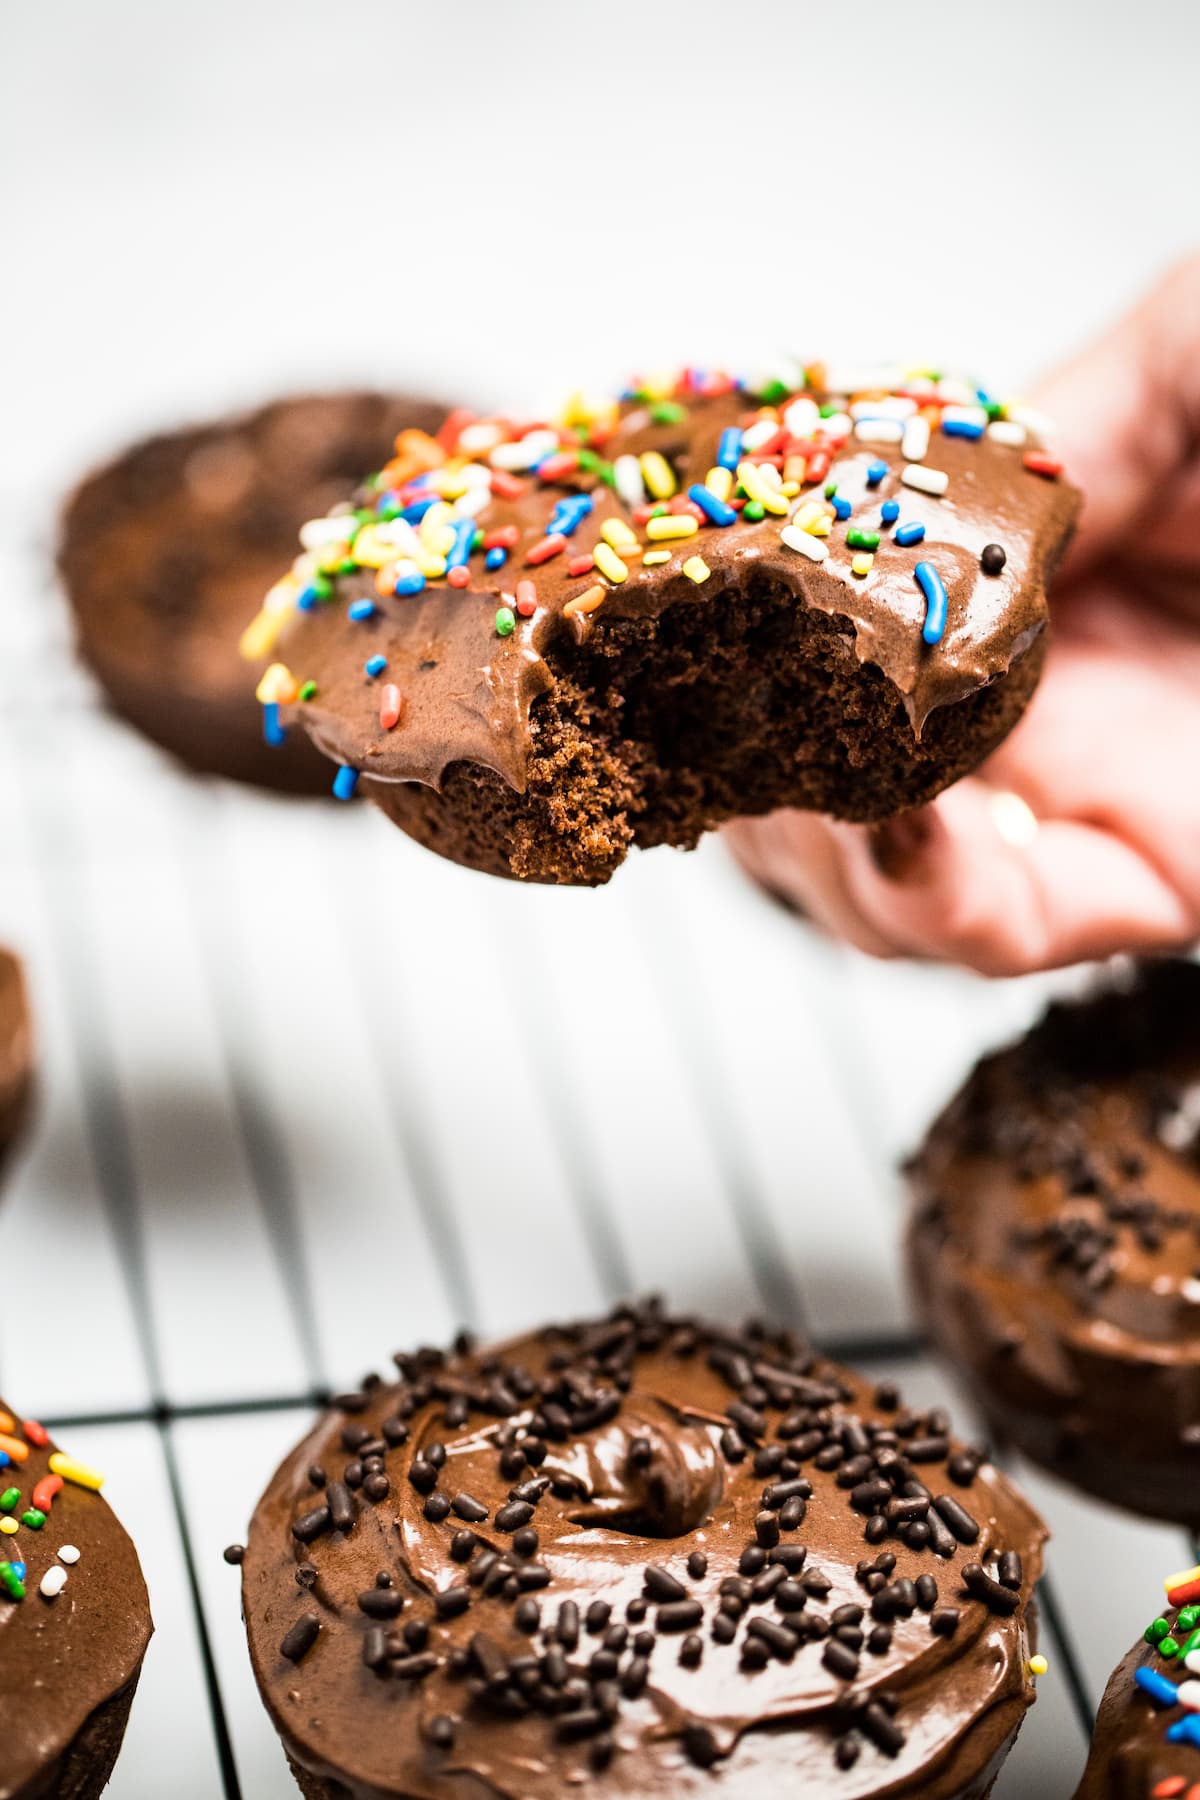 Chocolate donut with rainbow sprinkles with a bite taken out of it being held by a hand.